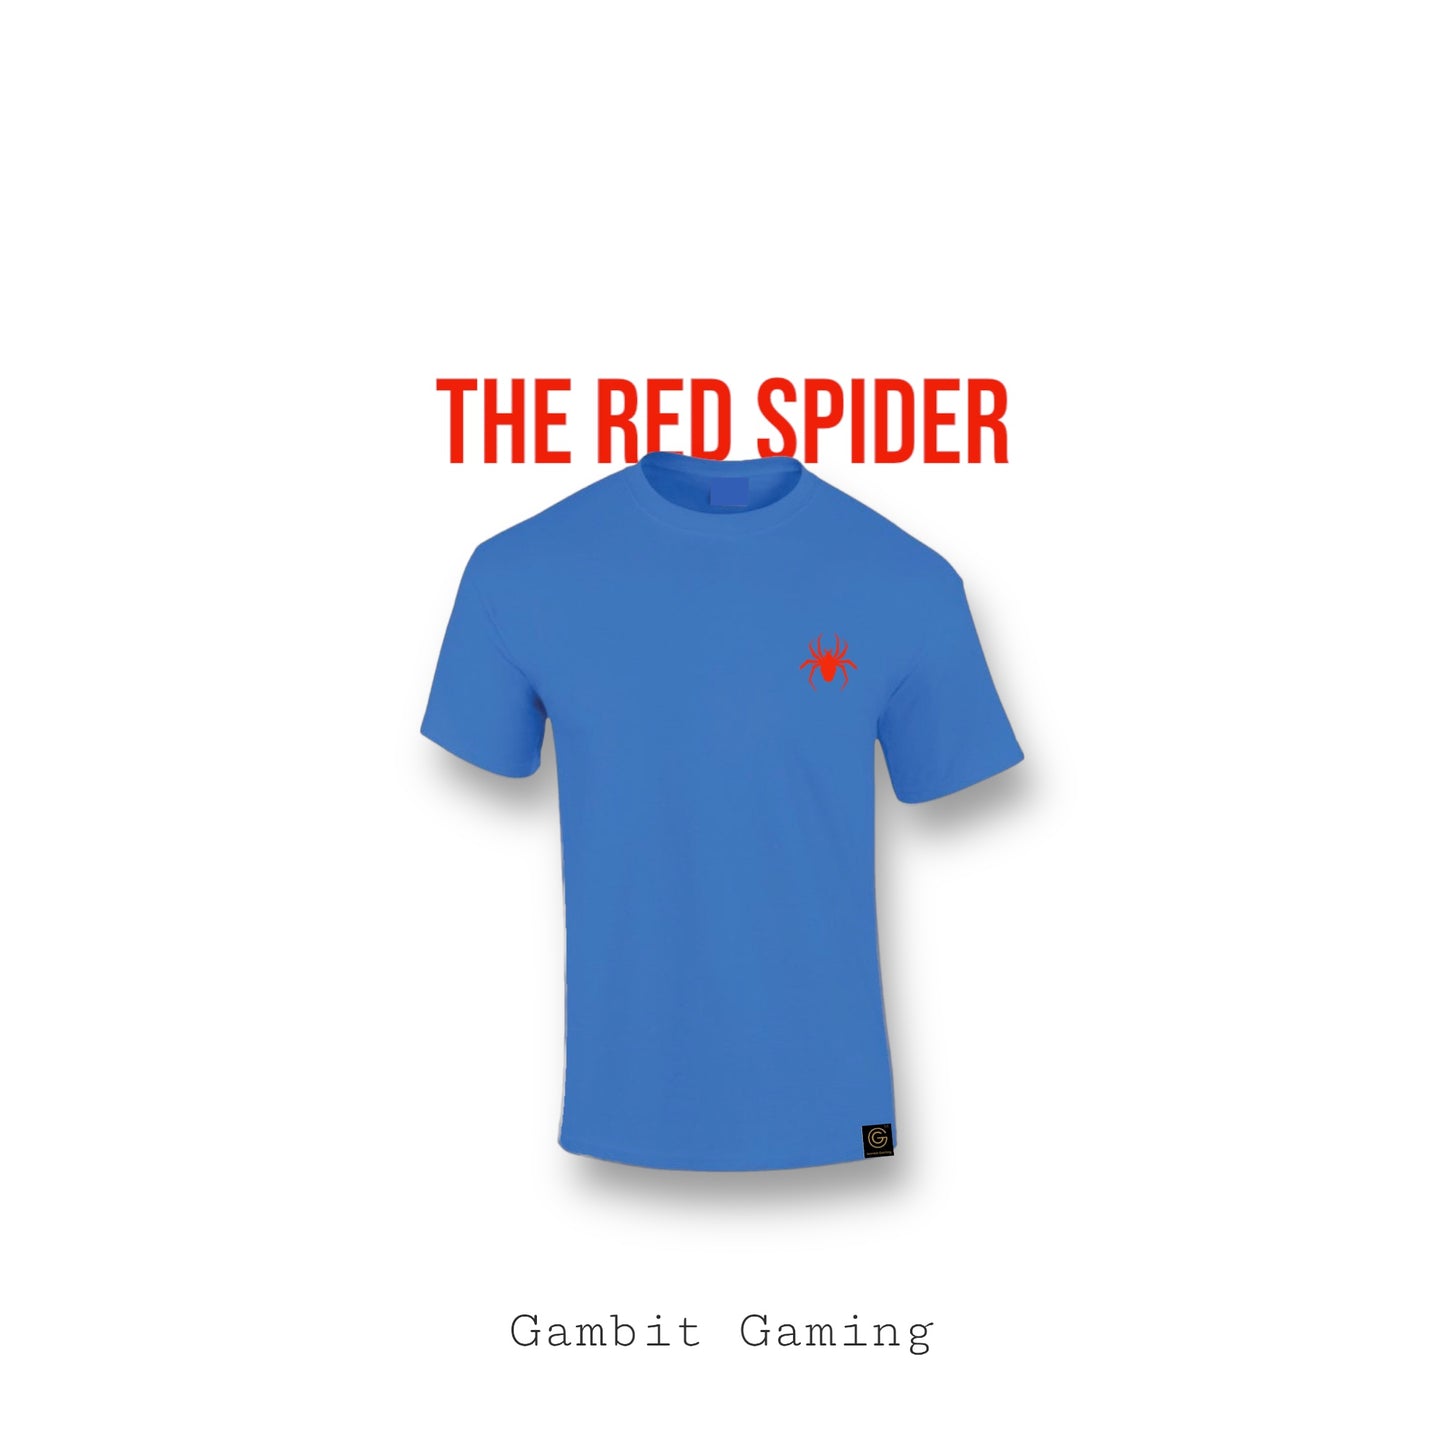 The Red Spider - Gambit Gaming